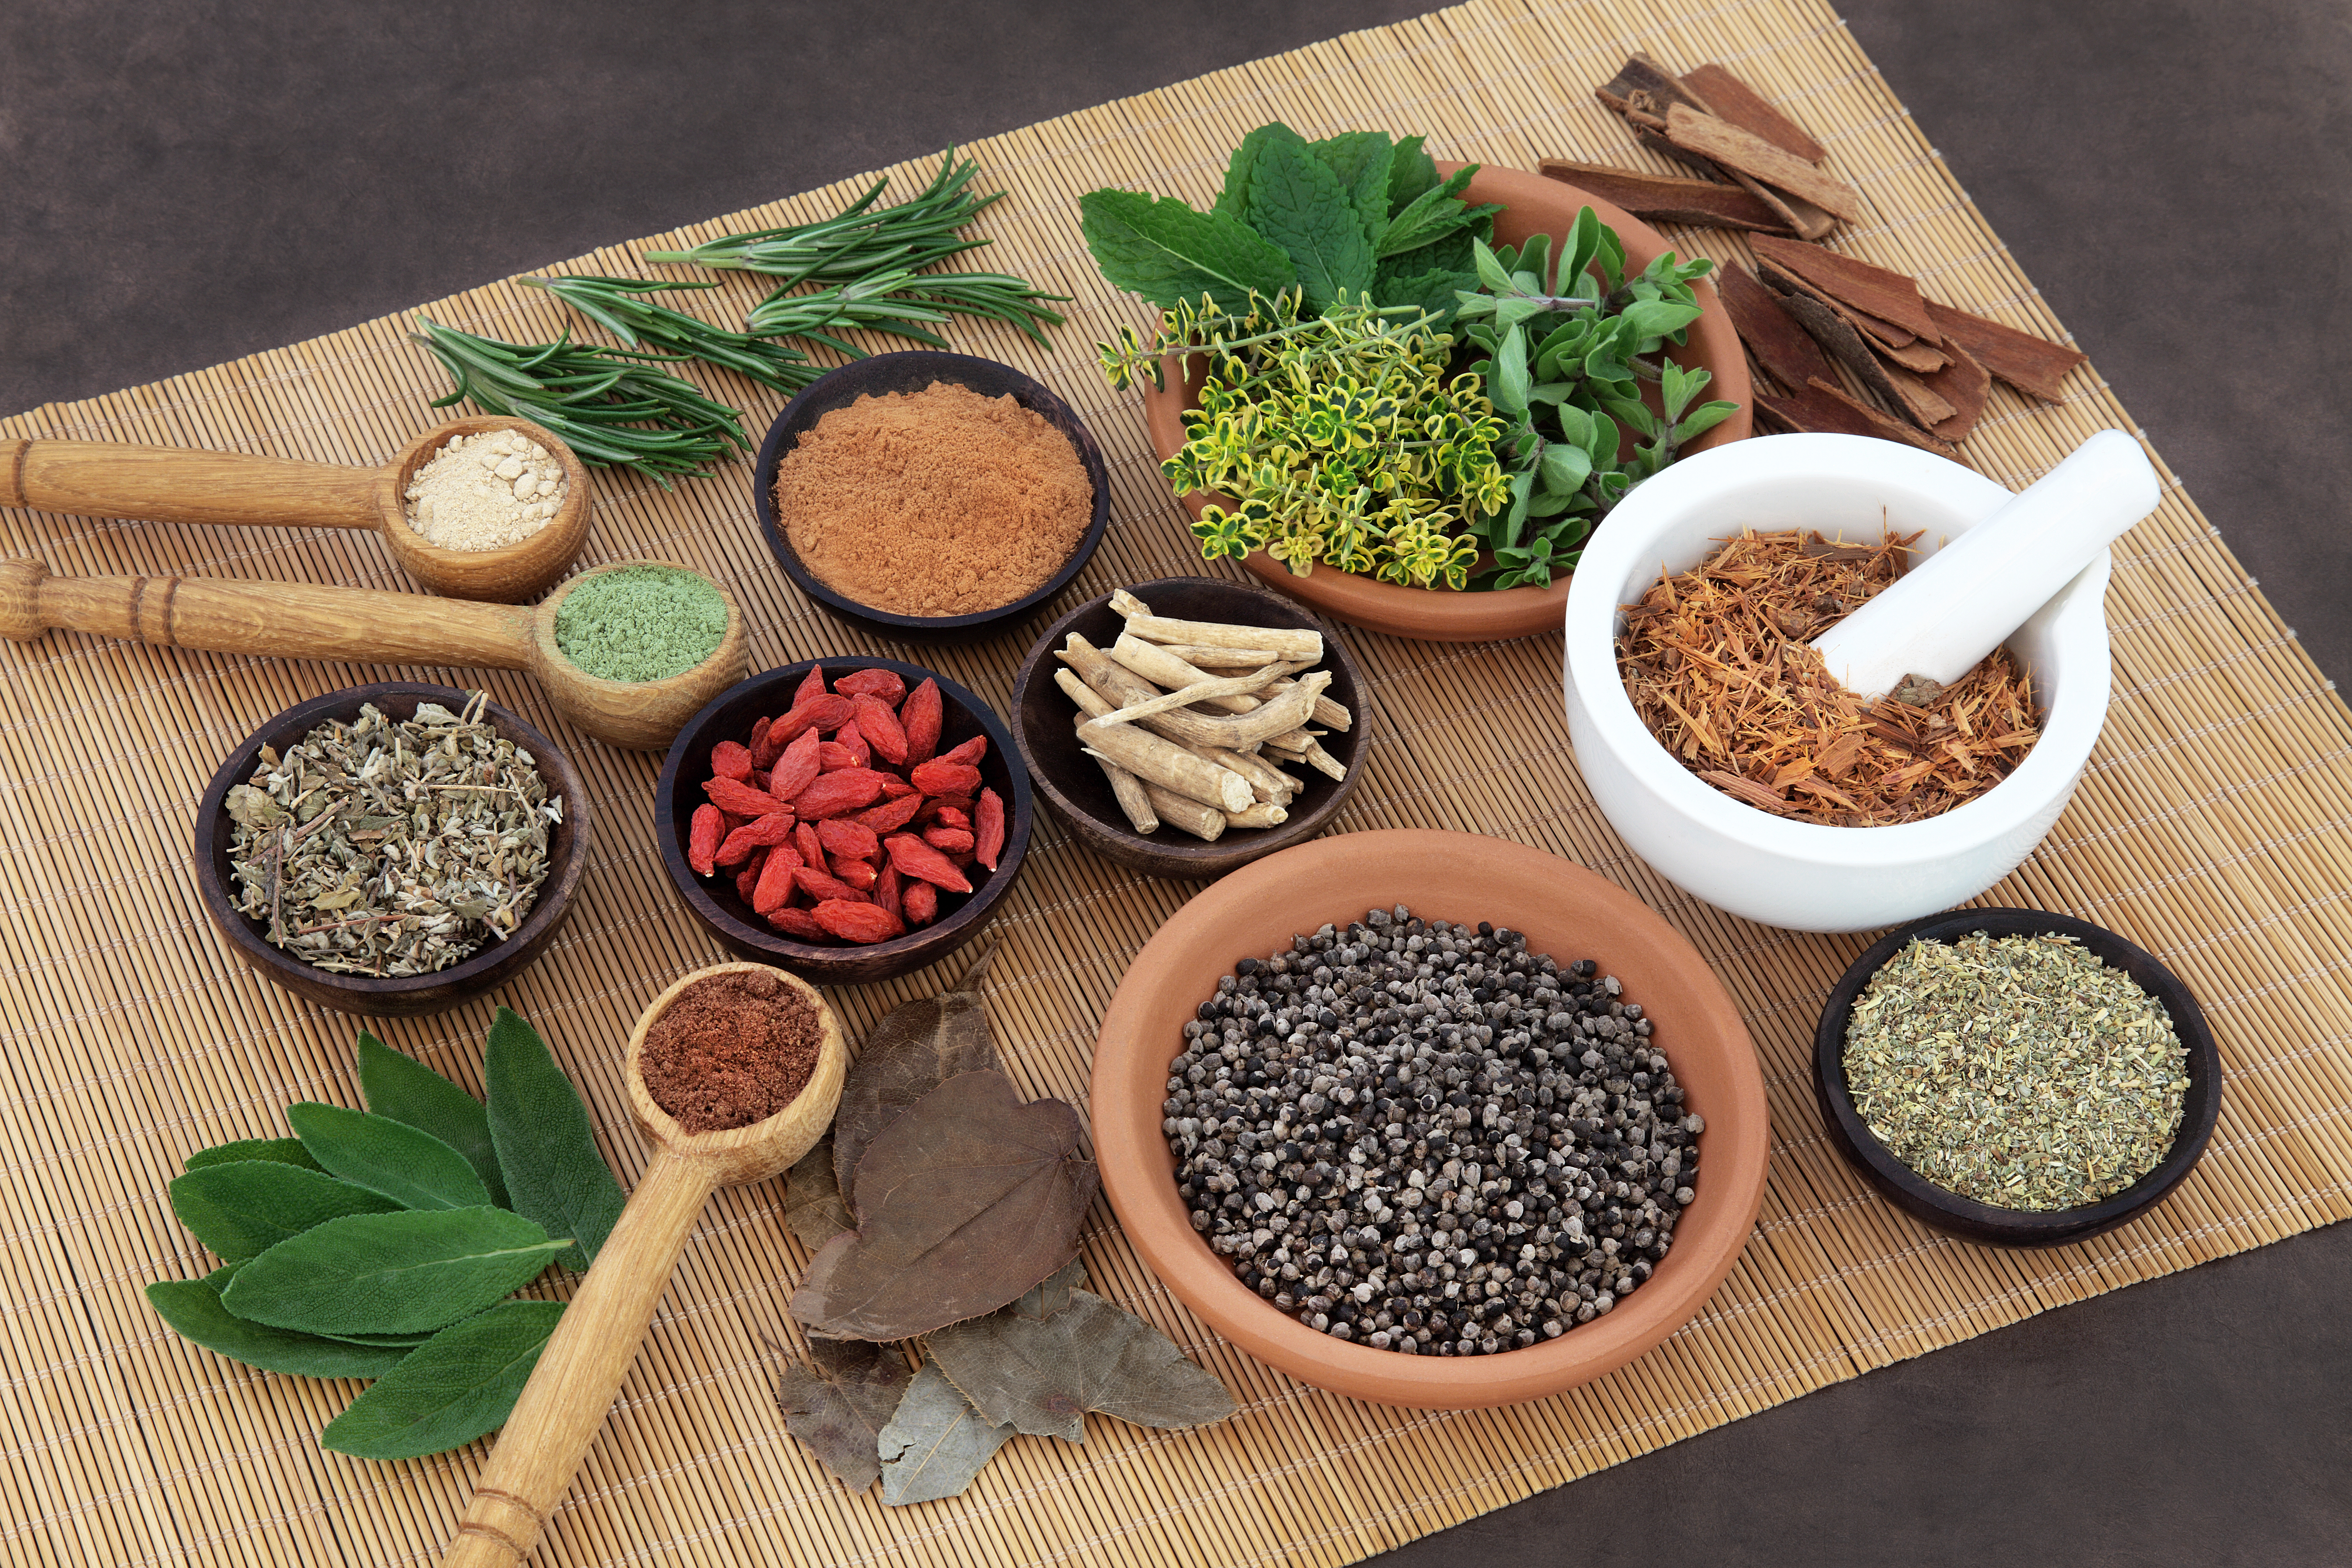 Featured image: Ayurveda not considered mainstream in India - Read full post: Why is Ayurveda not considered mainstream in India?